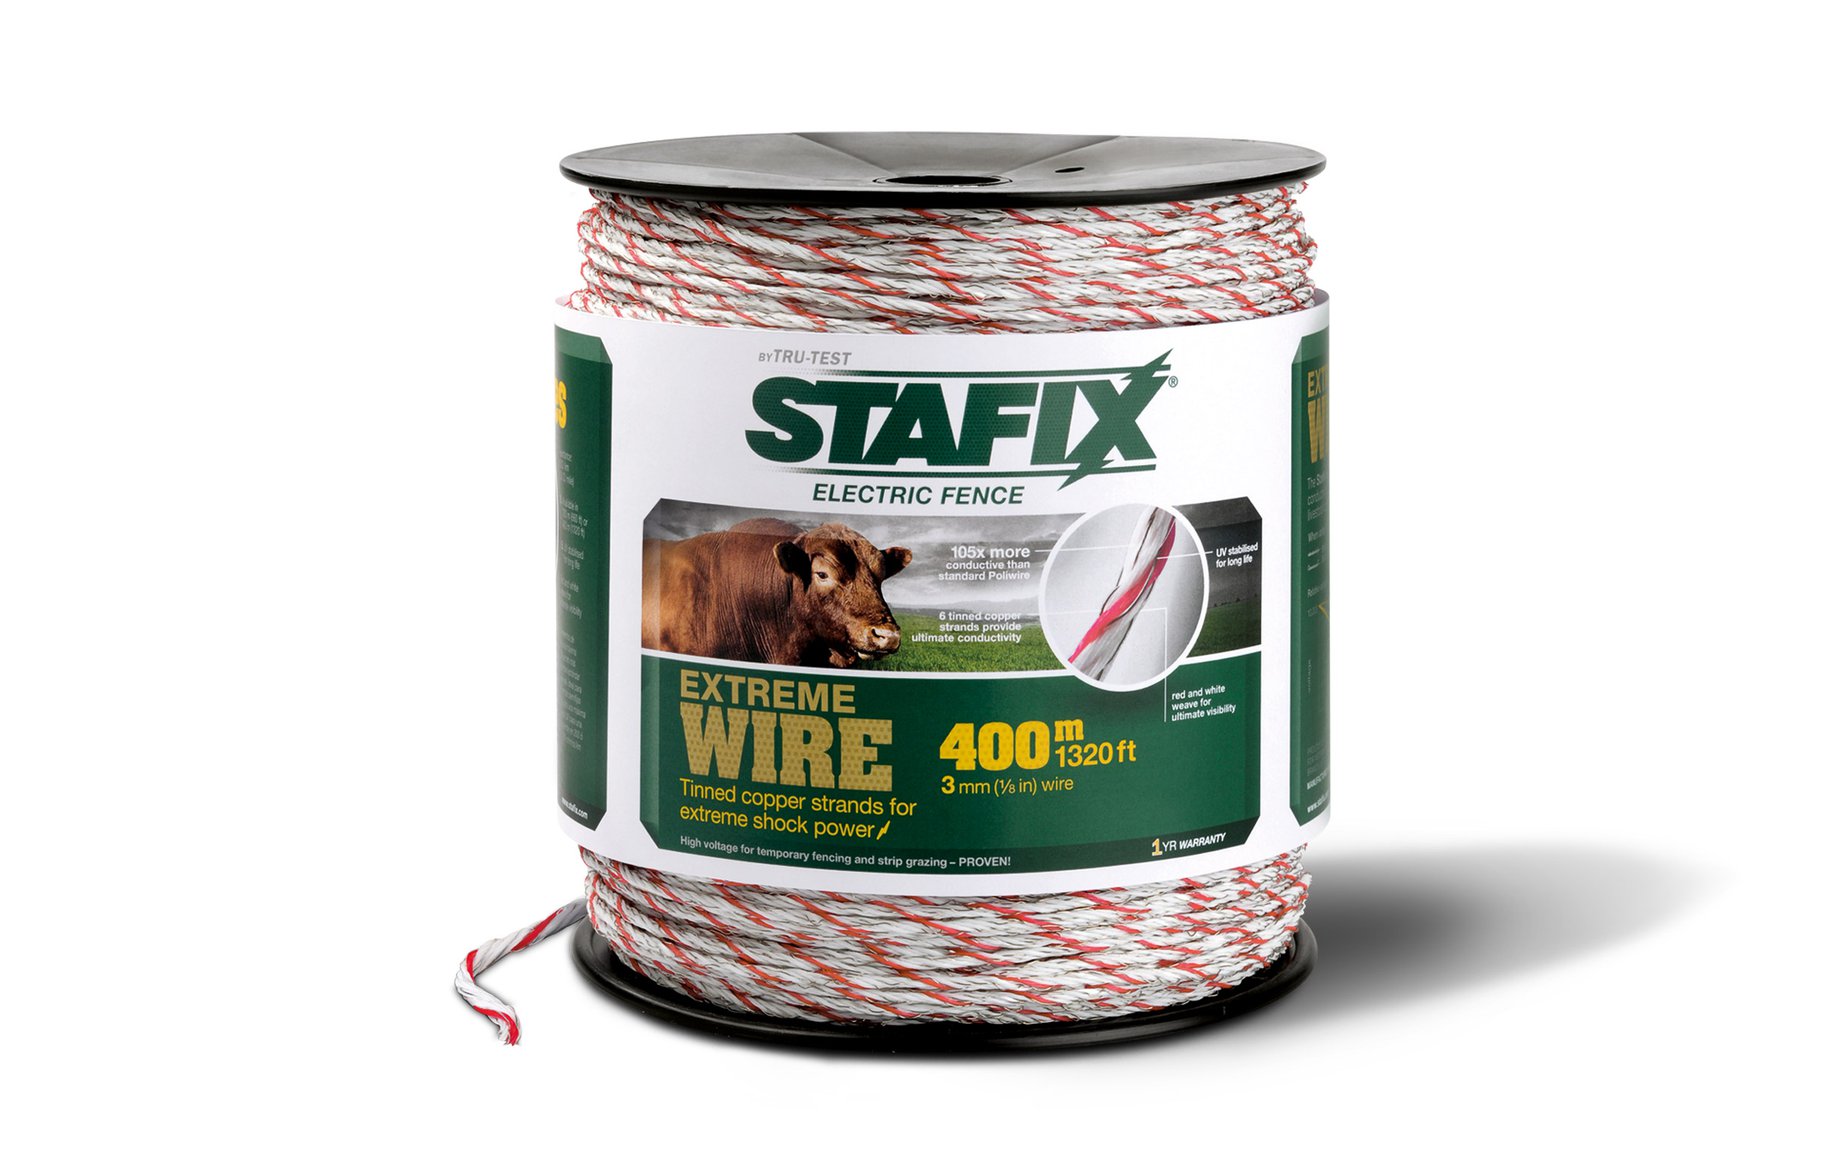 Stafix electric fence packaging 